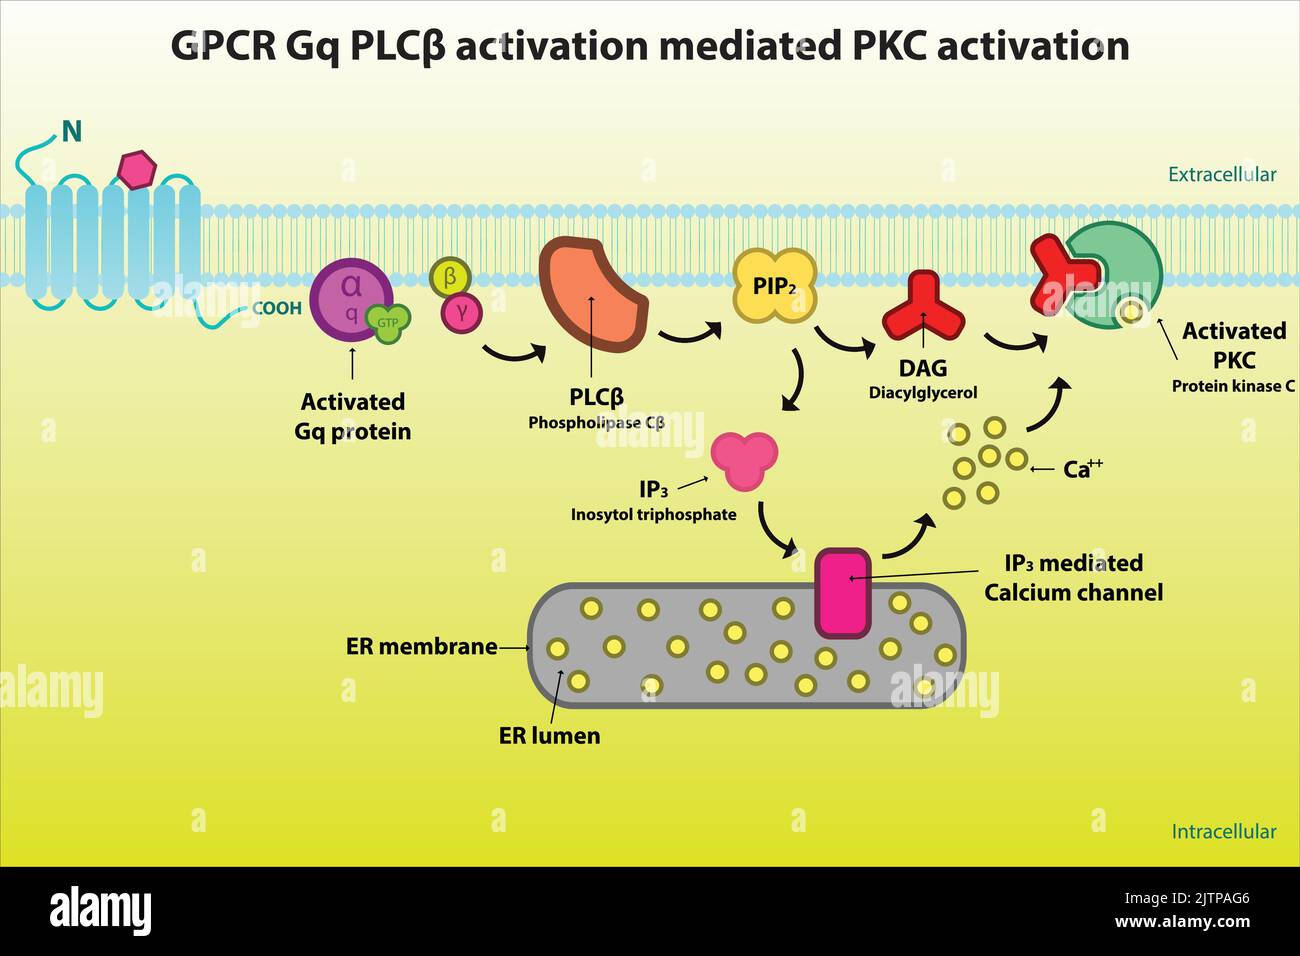 GPCR Gq signaling pathway diagram - via PLC beta, PIP2, DAG, IP3. Cellular response biochemical infographic for pharmacology education. Stock Vector